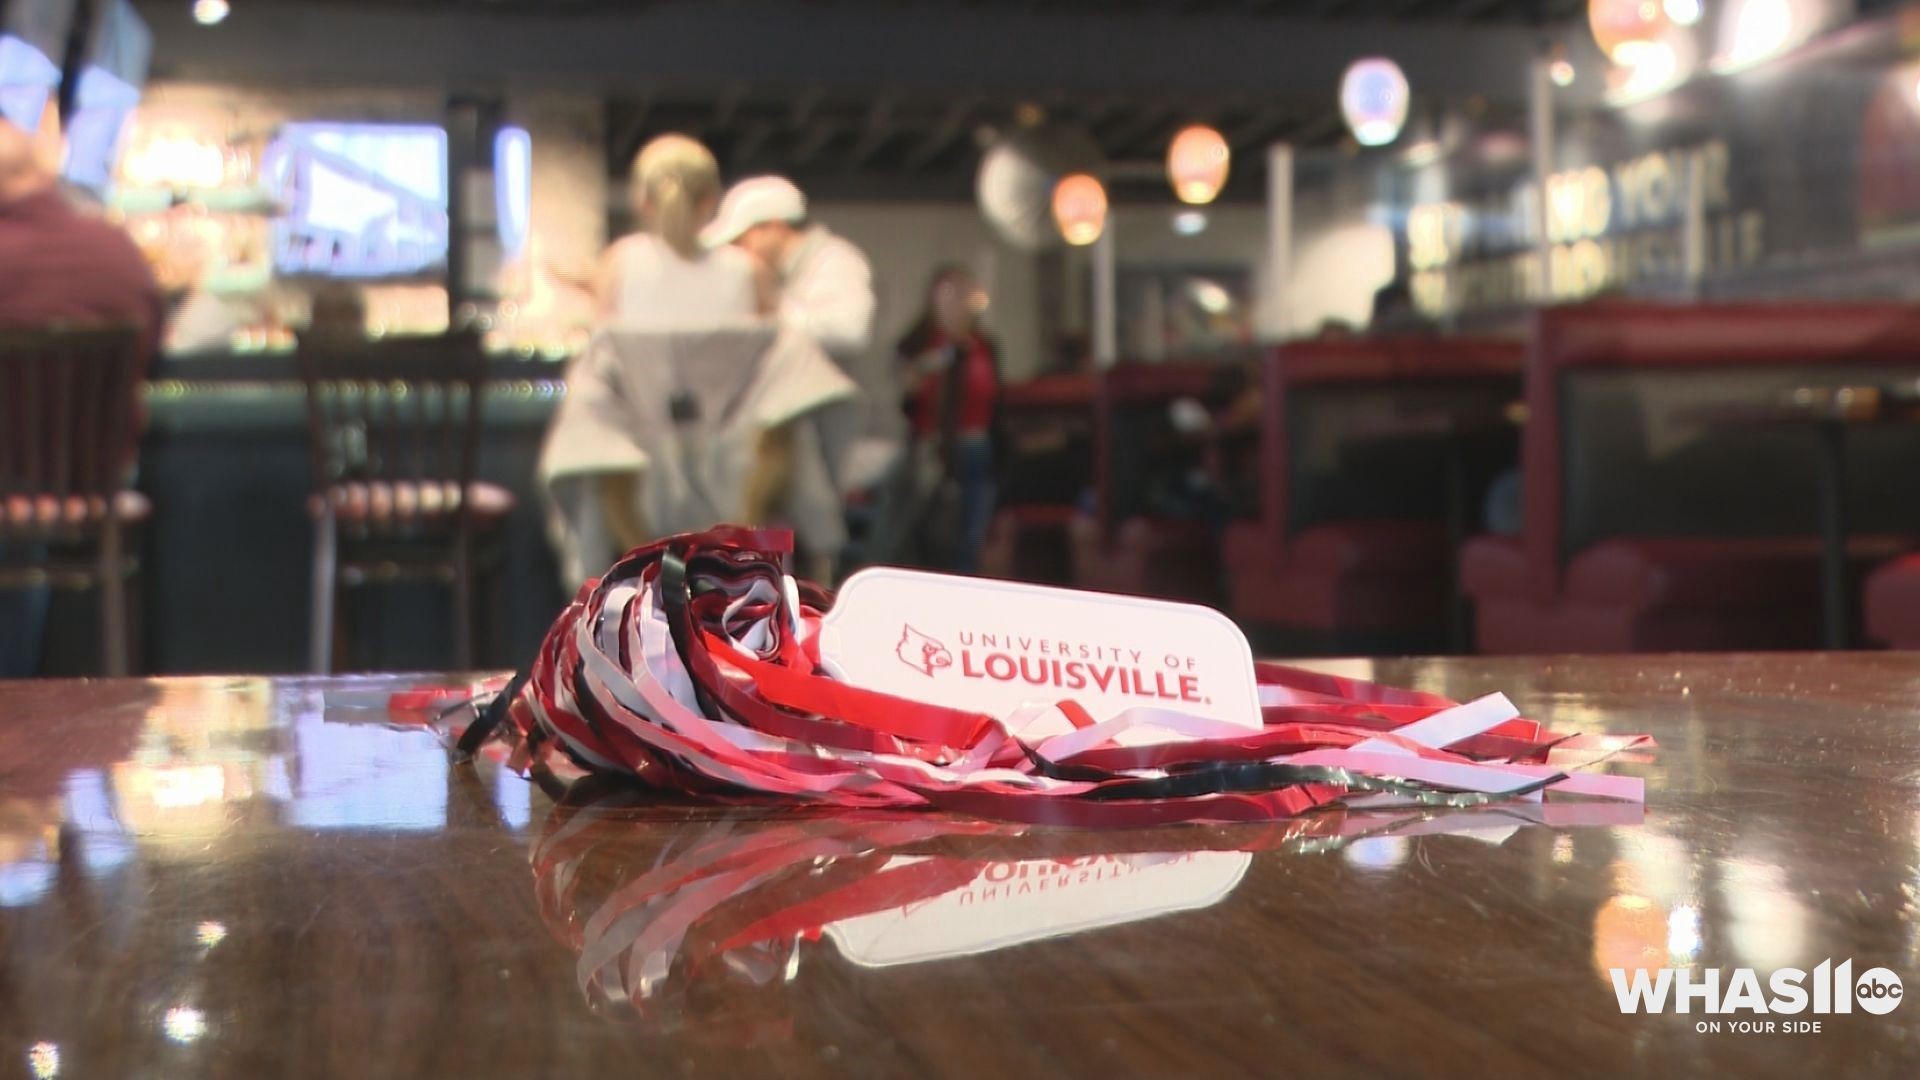 Parlour in downtown Louisville was filled - not just with fans hungry for a win - but life-long cheerleaders for their favorite school.